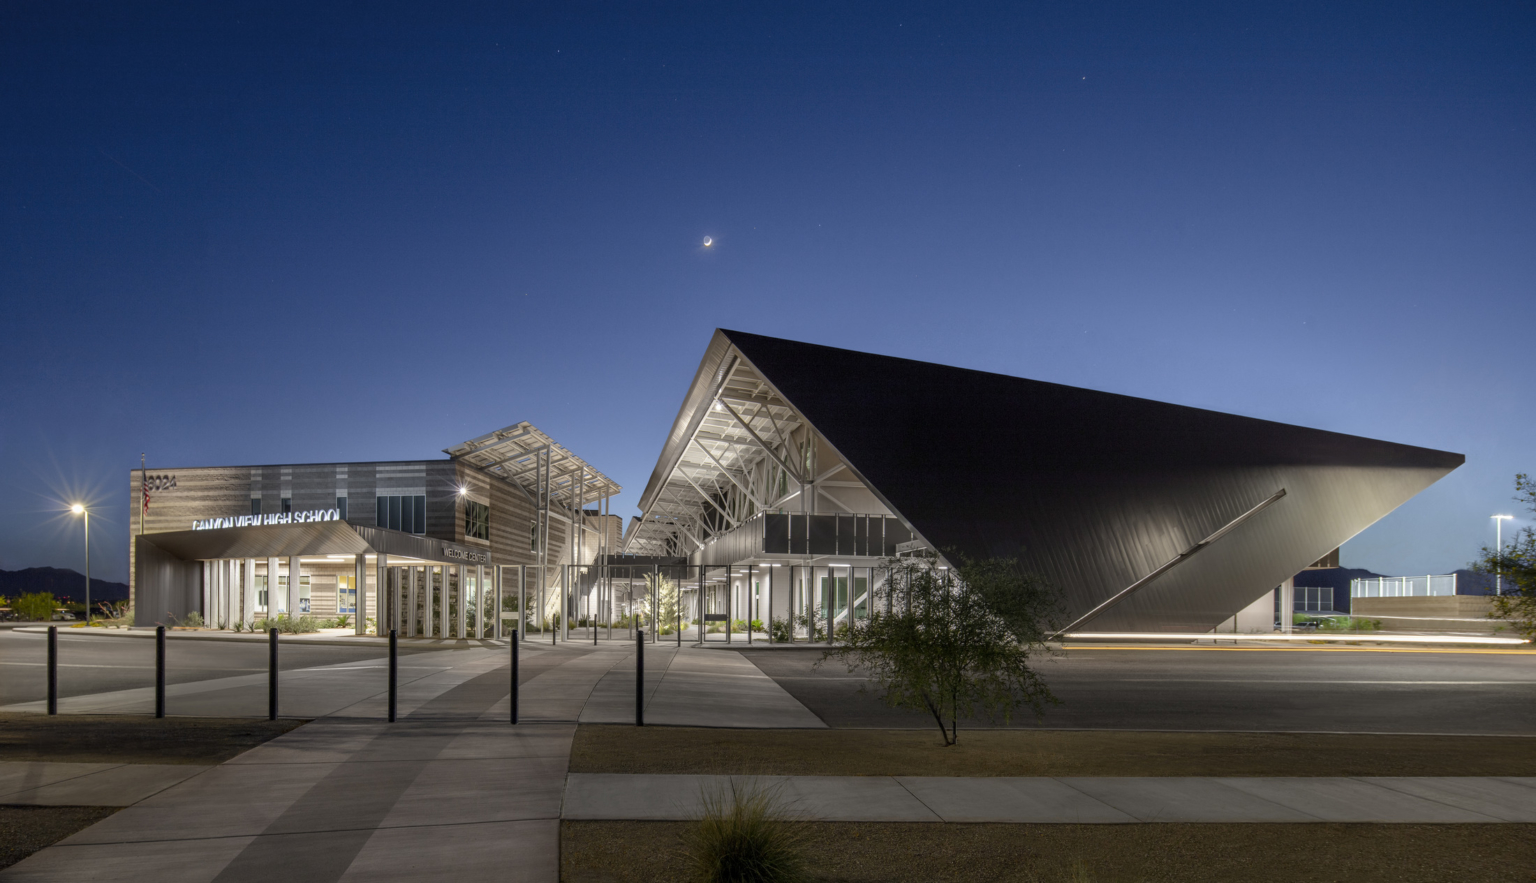 modern steel building with exposed structural beams and solar canopies illuminated at night